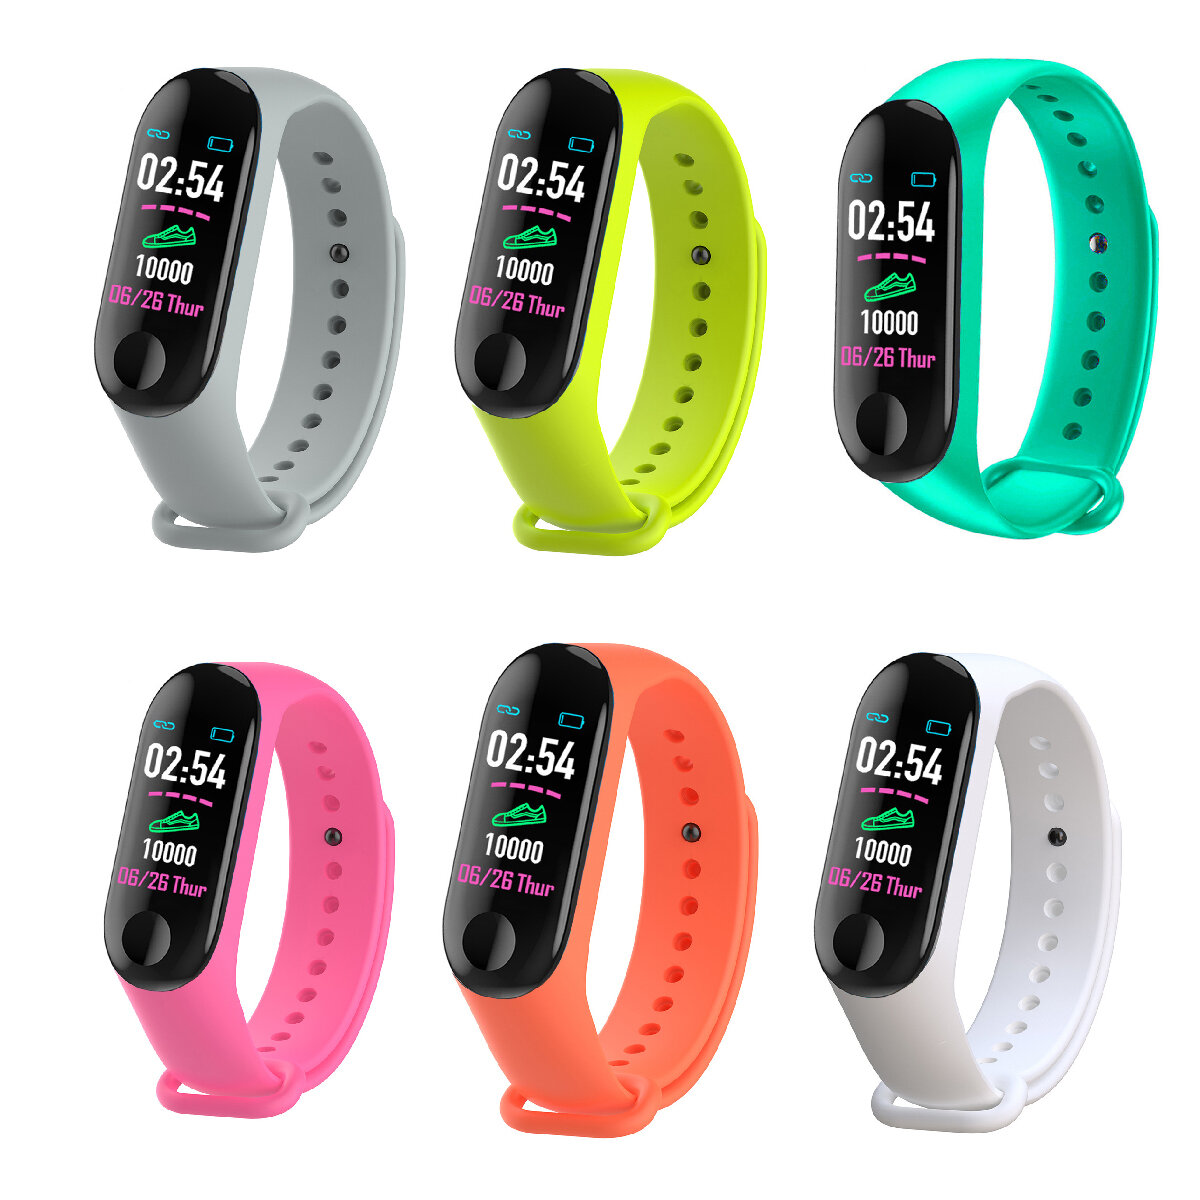 

Bakeey HD Color Screen Wristband Blood Pressure Heart Rate Monitor Running Route Track Camera Control Smart Watch